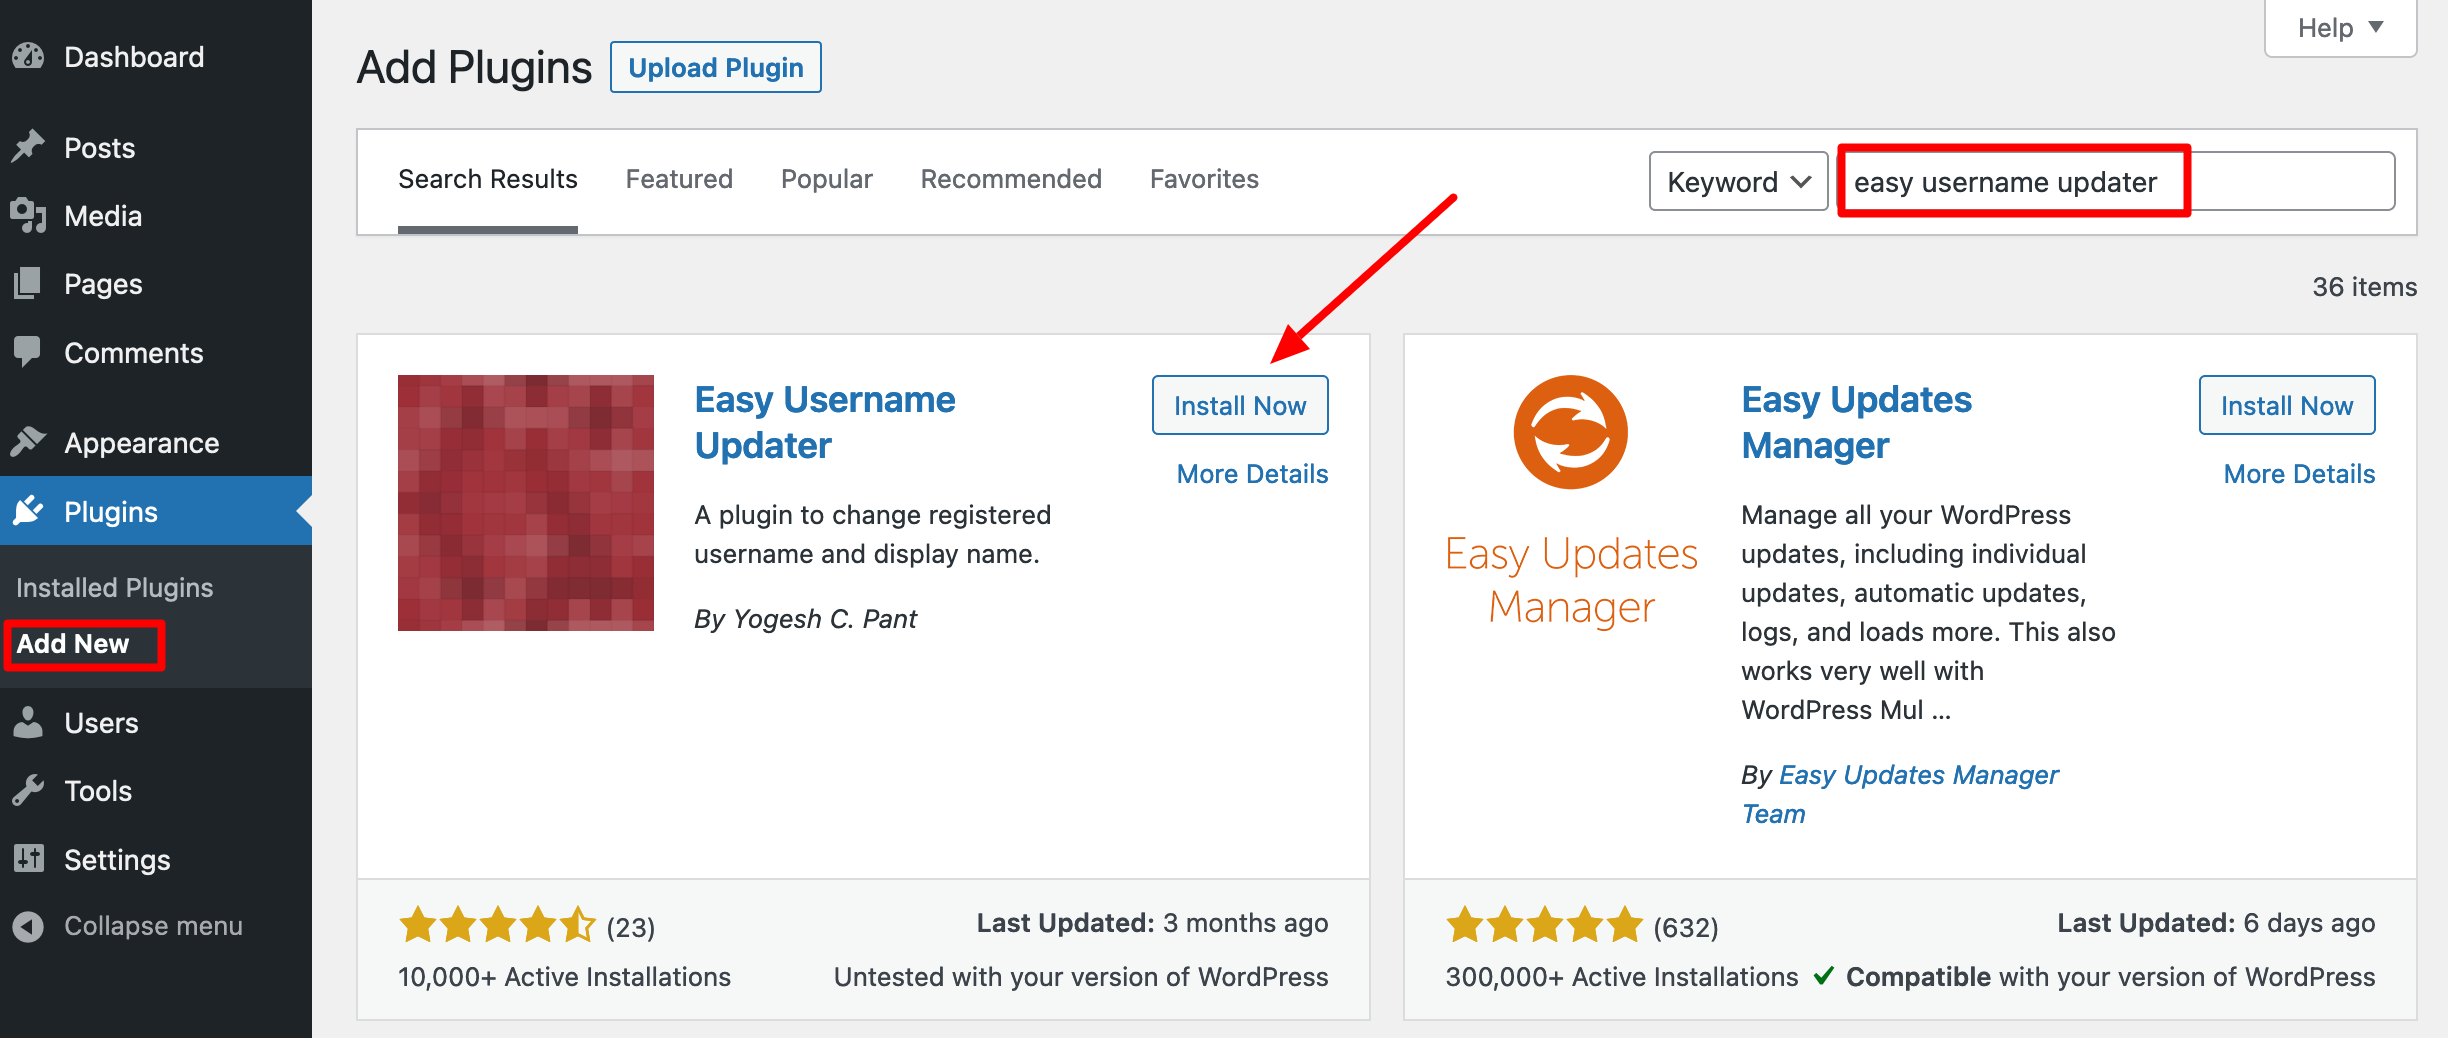 The Easy Username Updater plugin allows you to change your WordPress username.